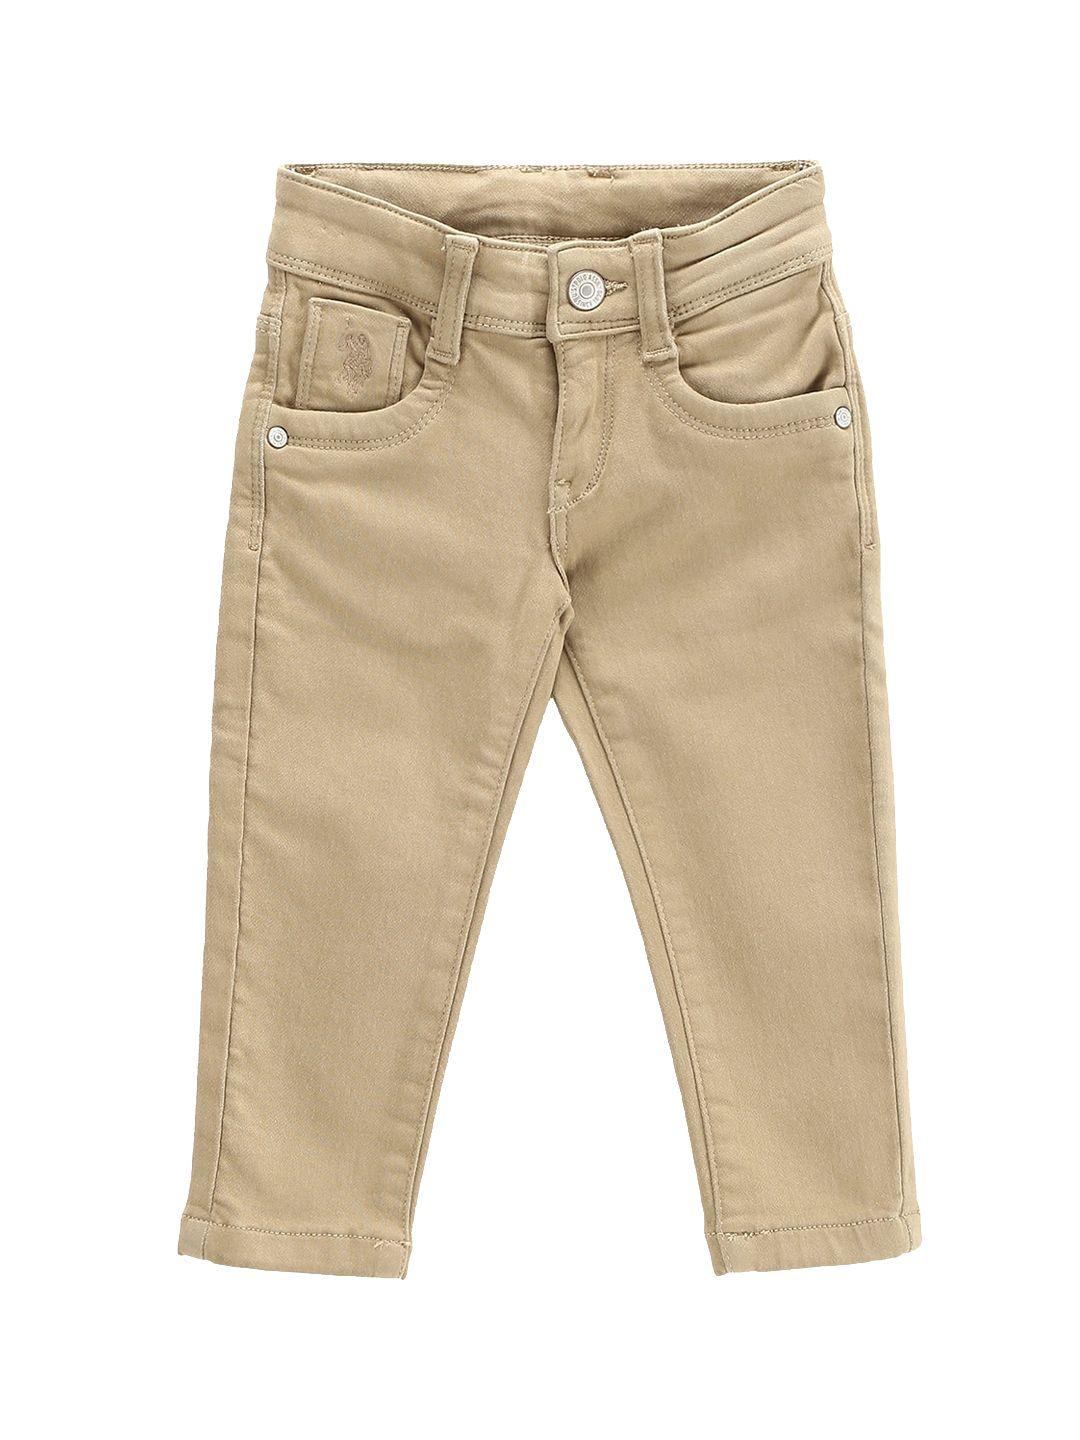 u.s. polo assn. kids boys slim fit mid-rise stretchable jeans